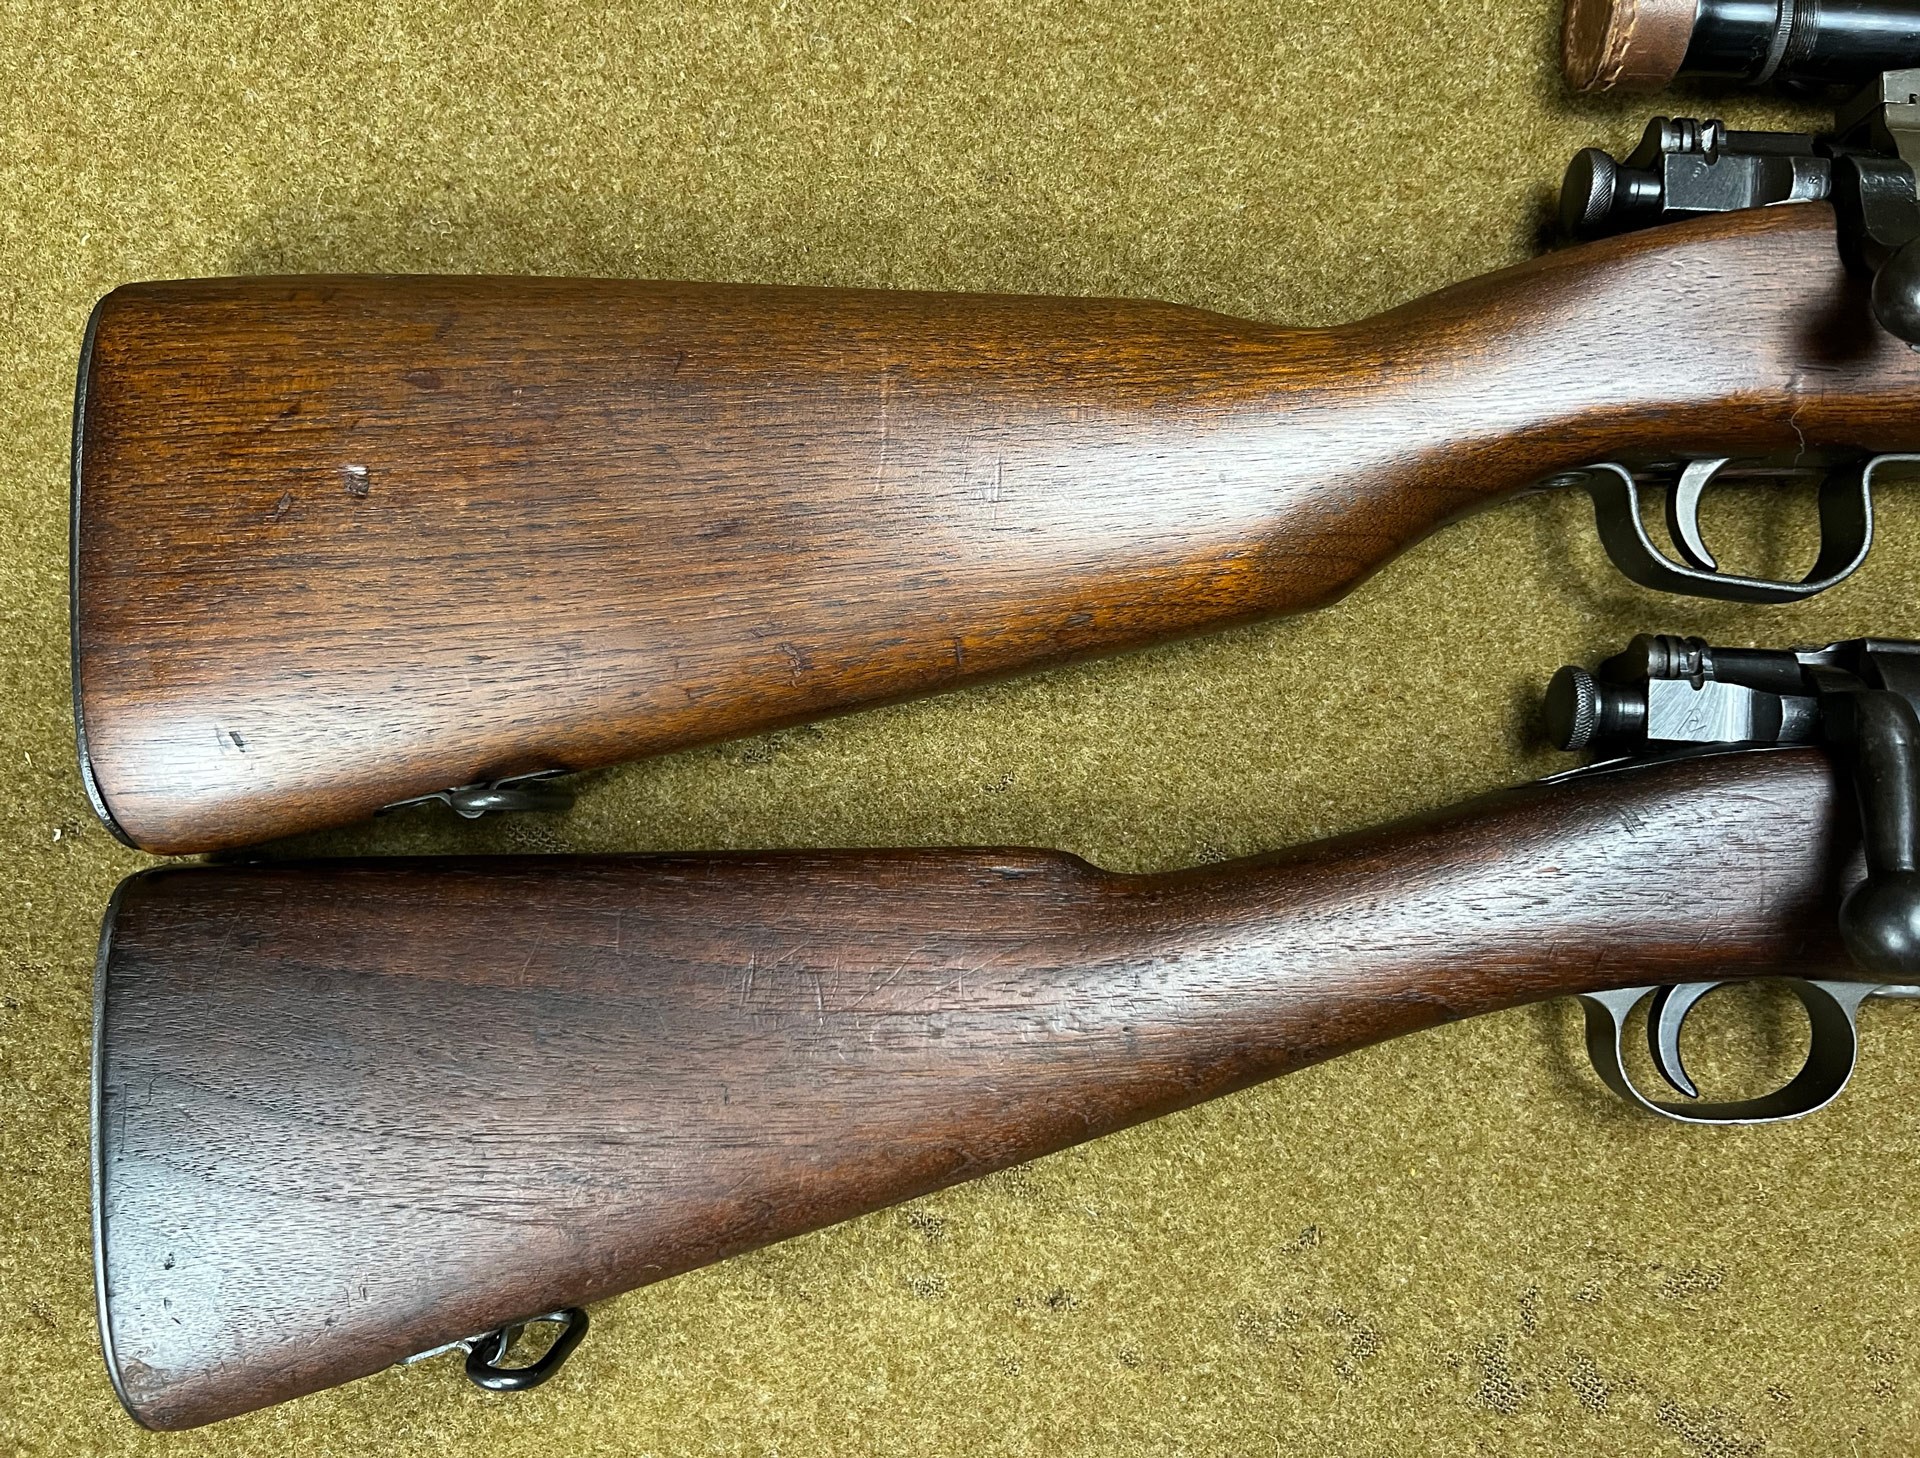 M1903 buttstock comparison two wood stock high wood low wood